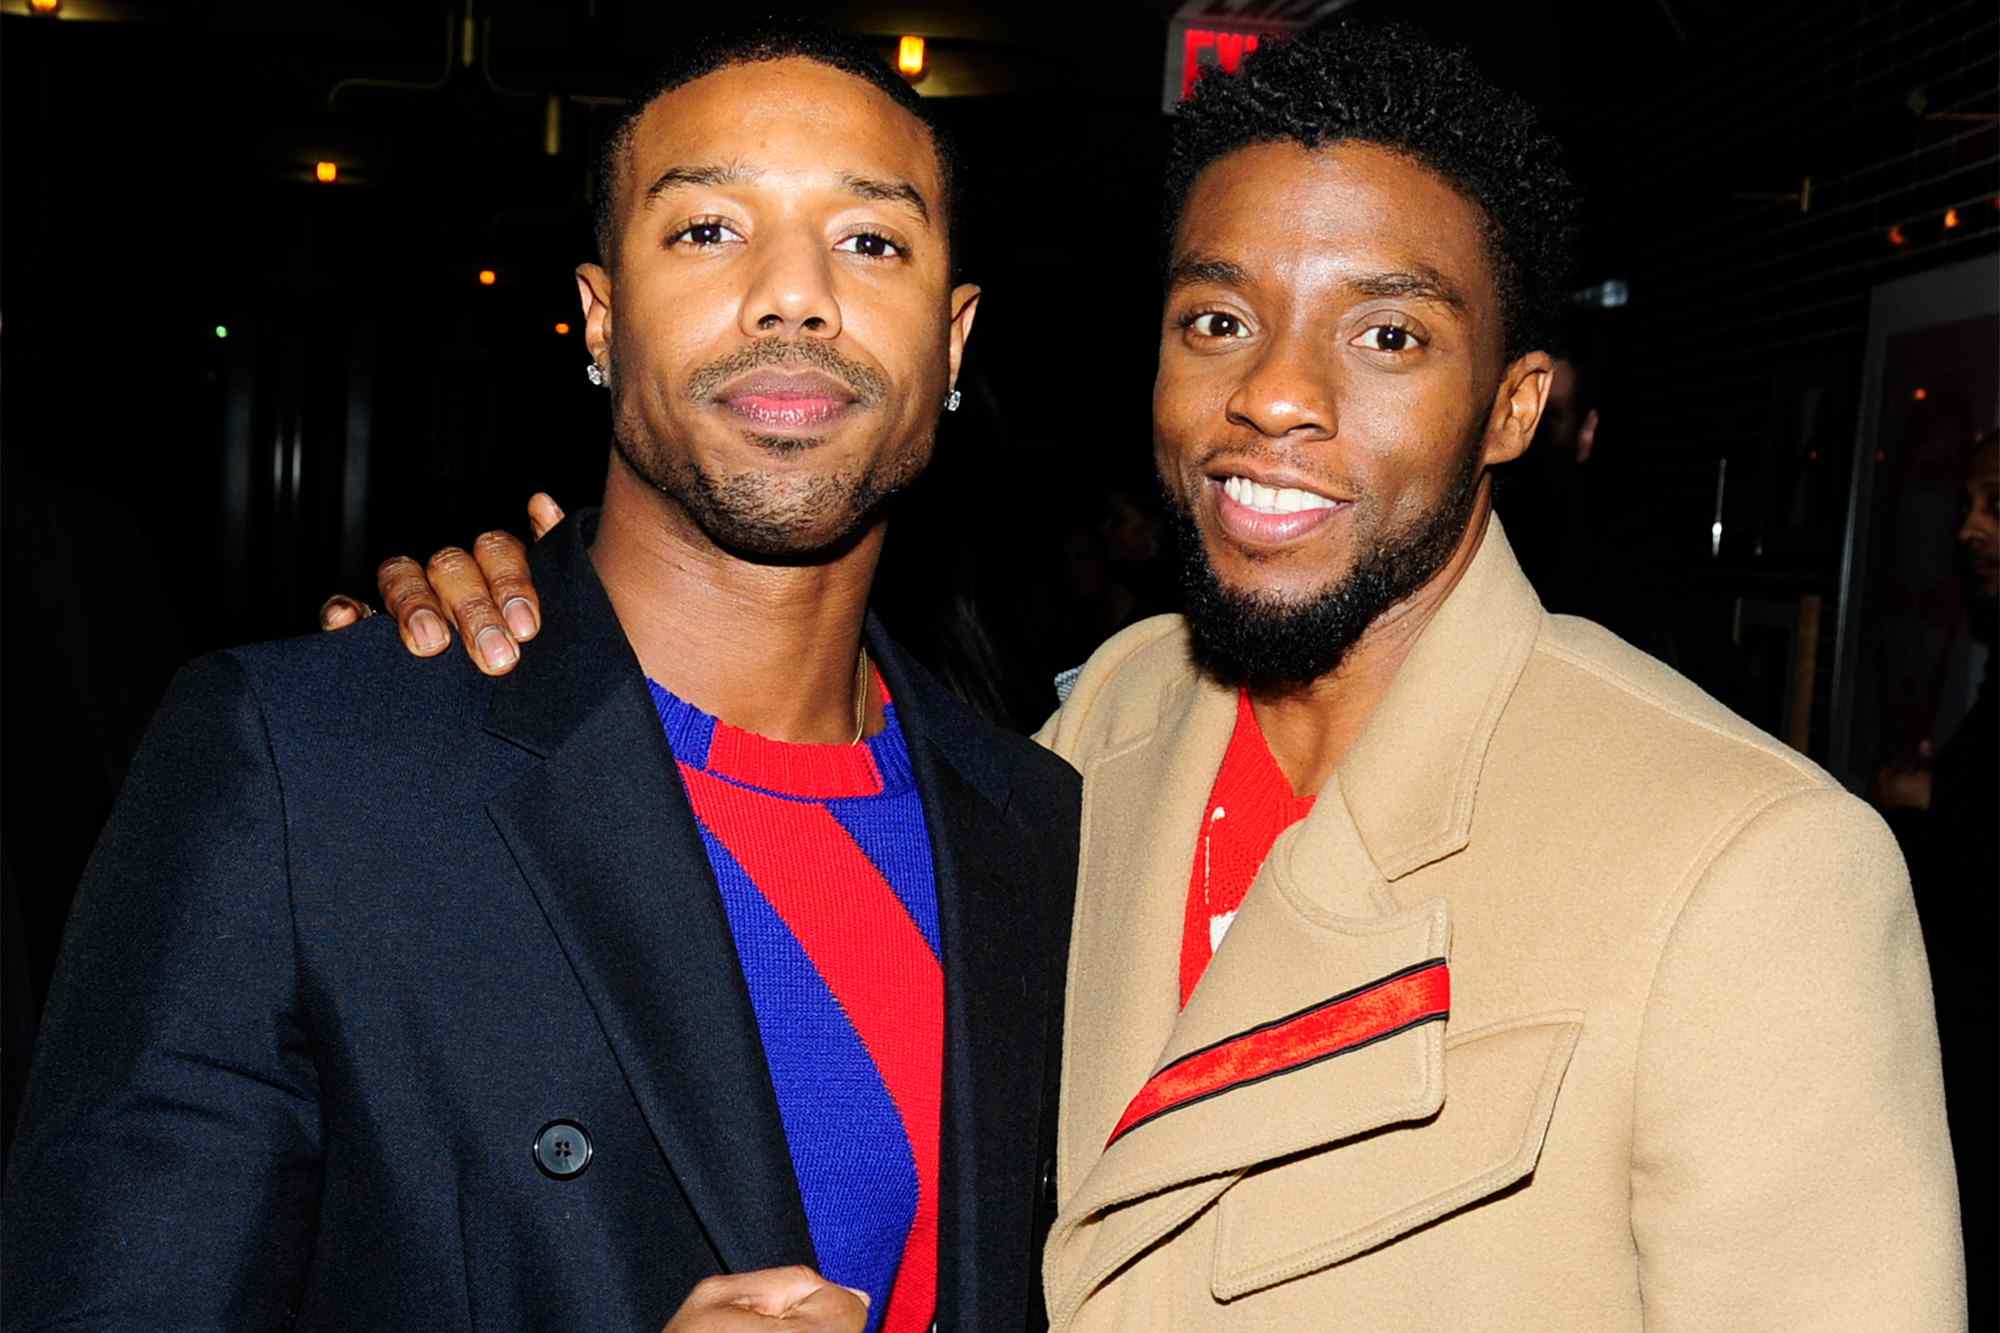 Chadwick Boseman and Michael B. Jordan attend The Cinema Society with Ravage Wines & Synchrony host the after party for Marvel Studios' "Black Panther" at The Skylark on February 13, 2018 in New York City.